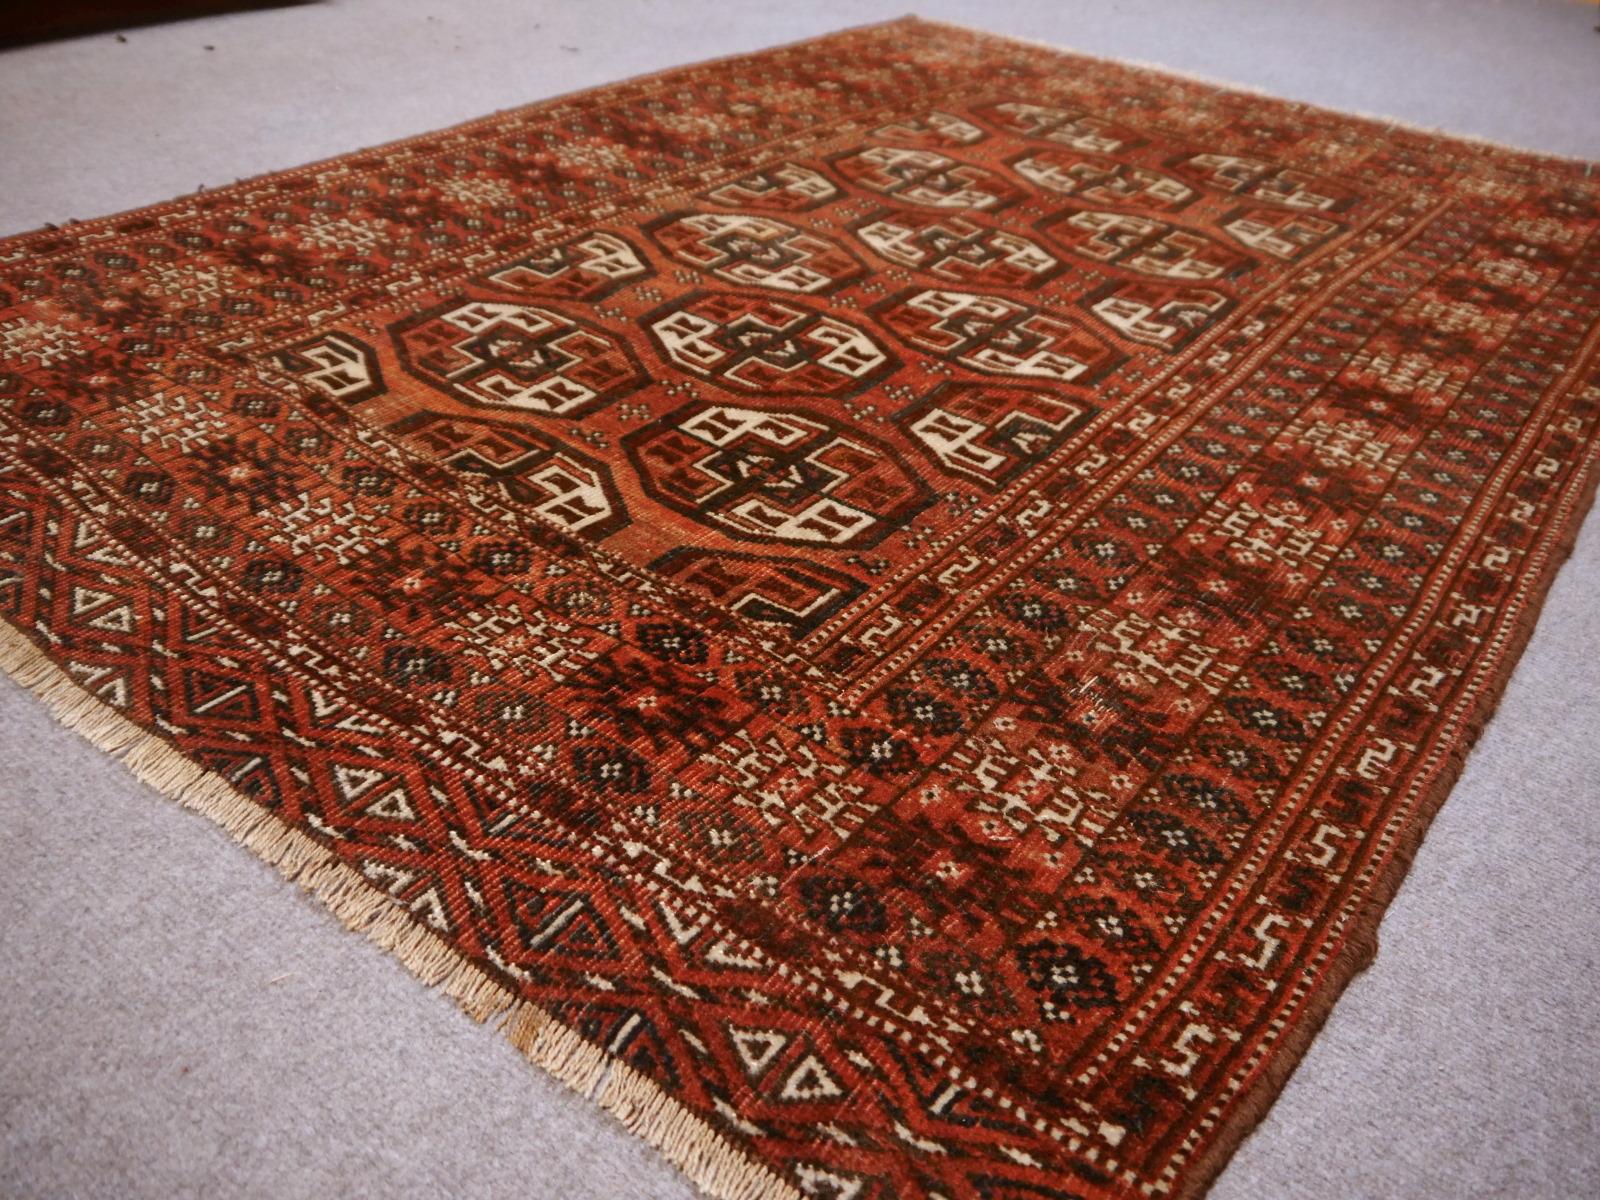 Fine hand knotted Russian Turkmen Bokhara rug or Turkmen rug 
Beautiful antique tribal Turkmen carpet in good condition. These carpets are named 